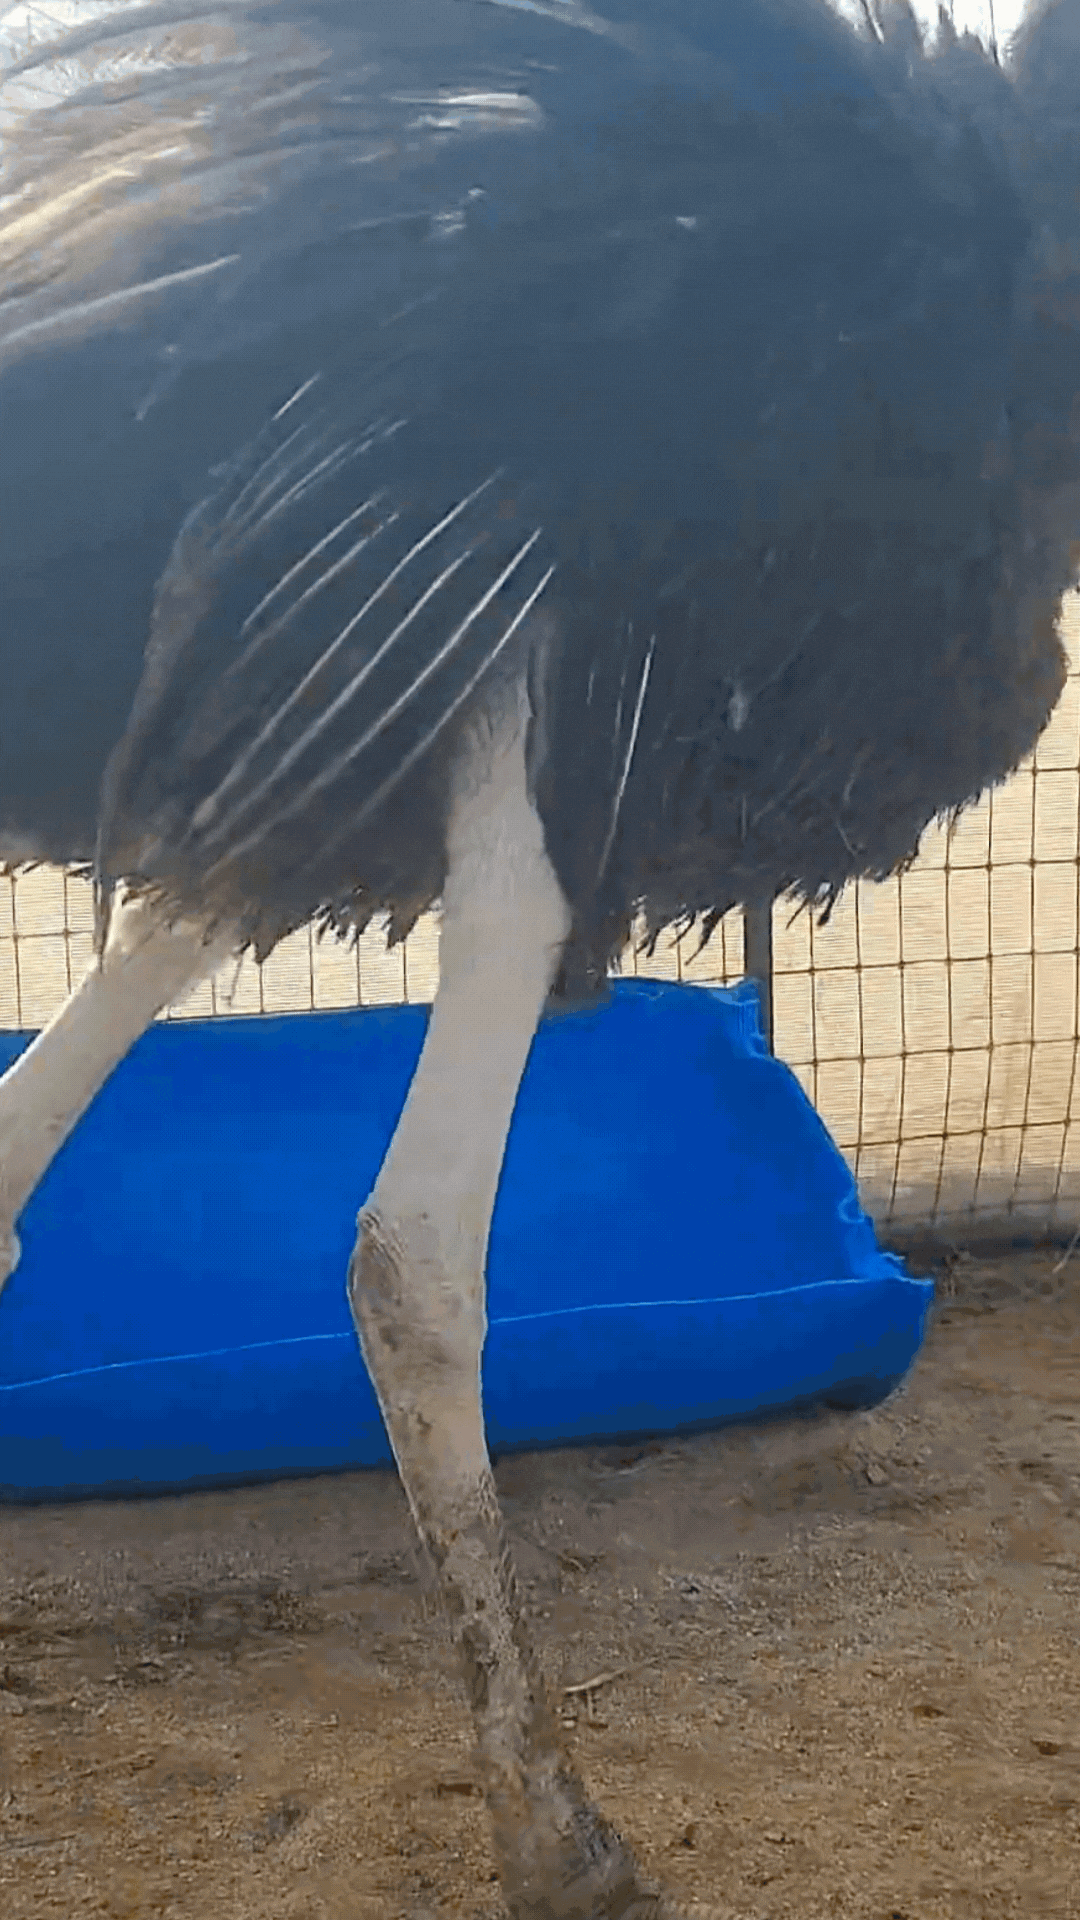 GIF of an ostrich with injured legs